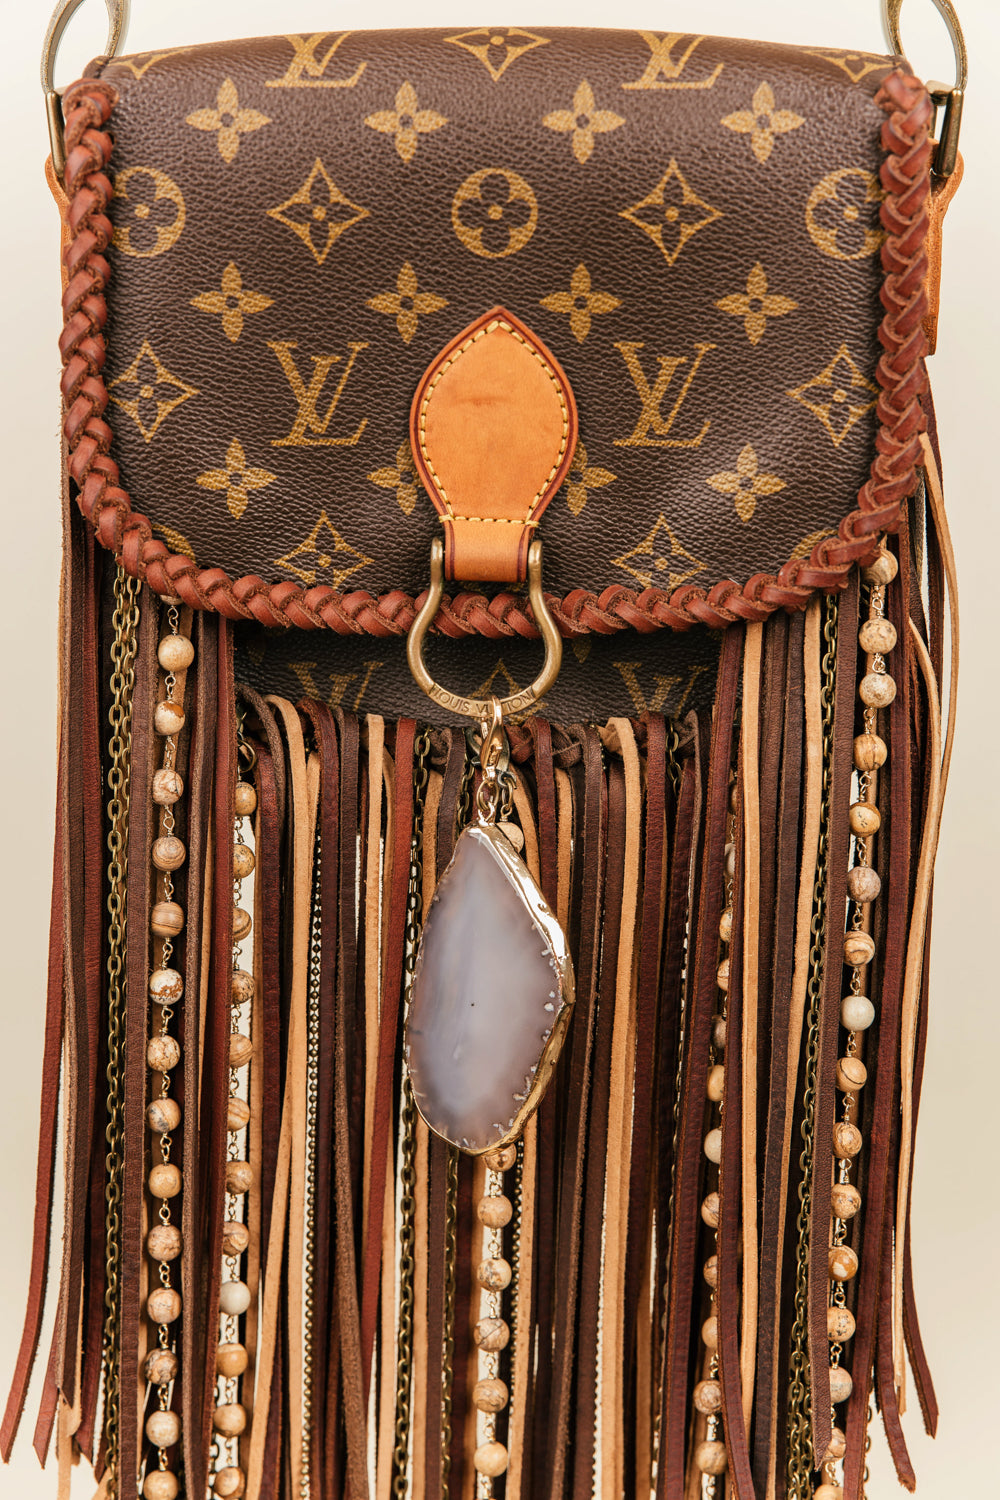 10 Great LOUIS VUITTON Shoulder and Crossbody Bags To CONSIDER 